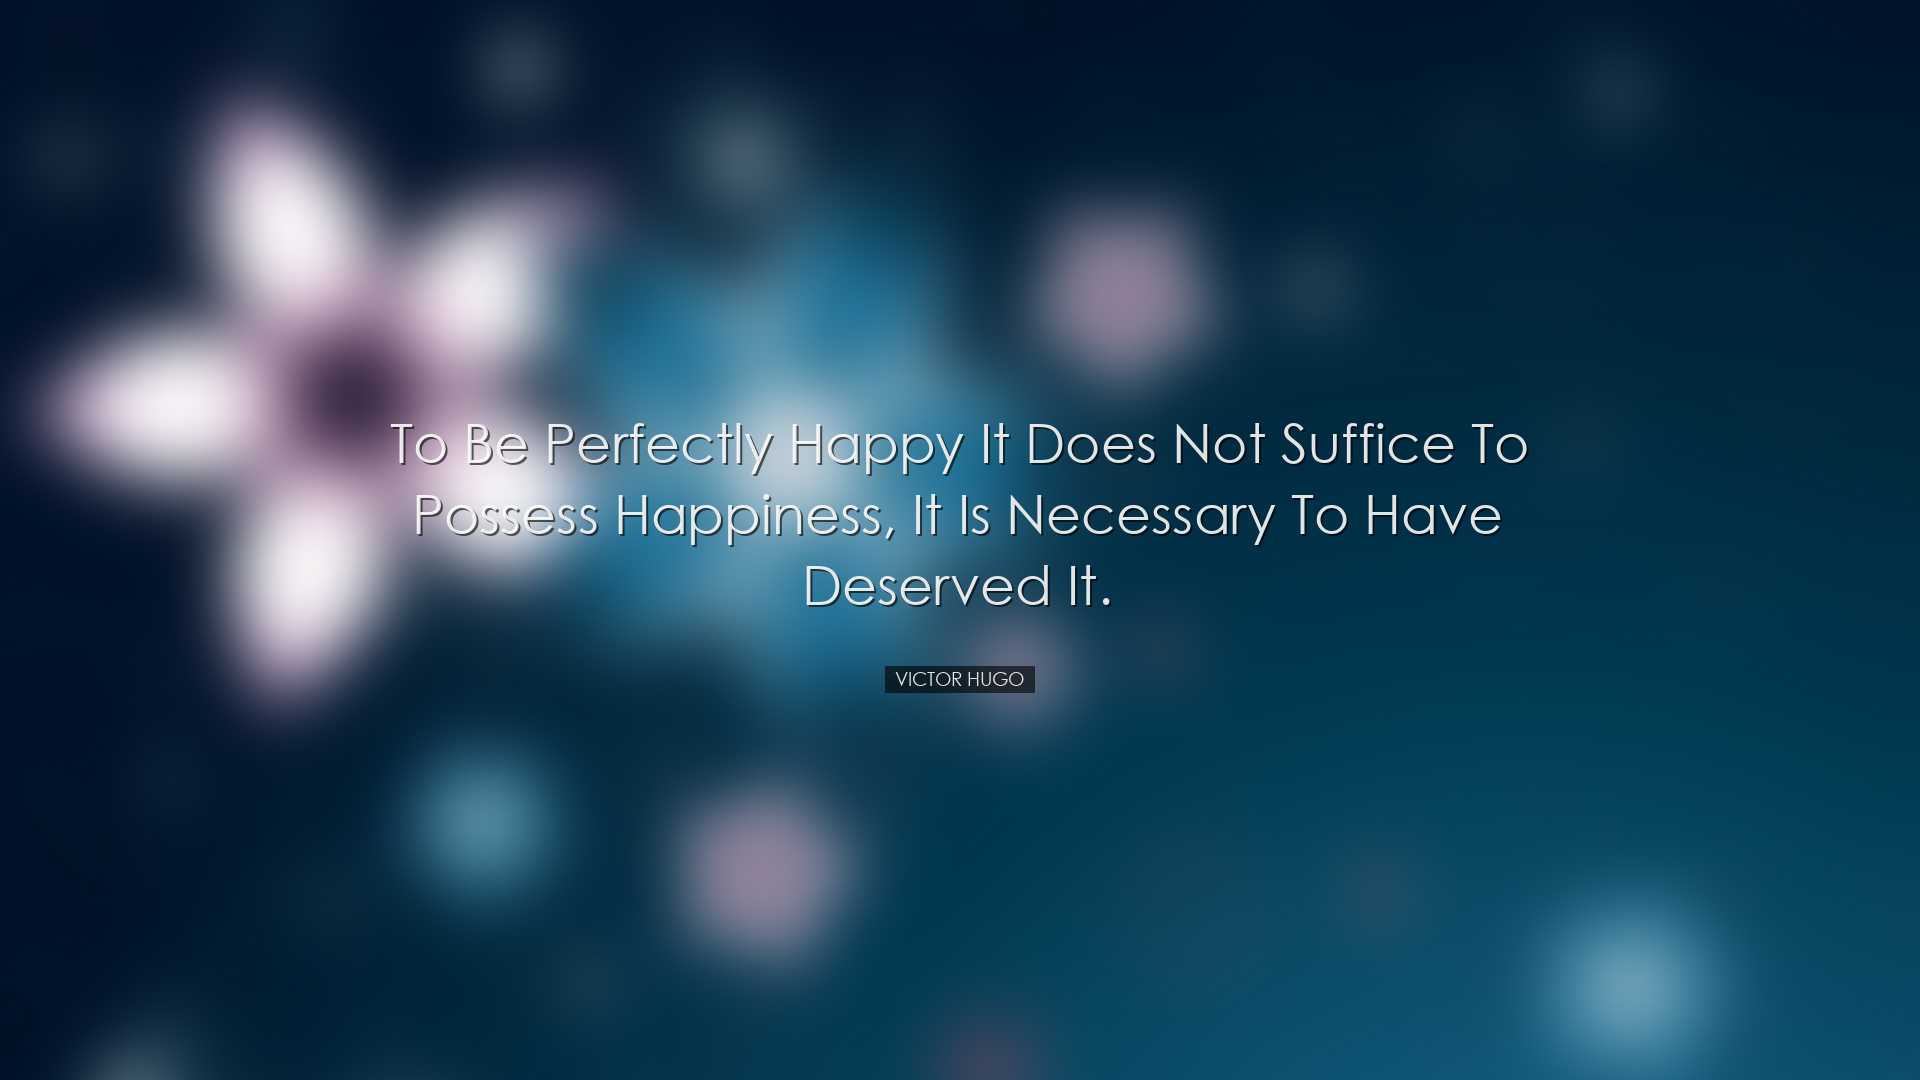 To be perfectly happy it does not suffice to possess happiness, it